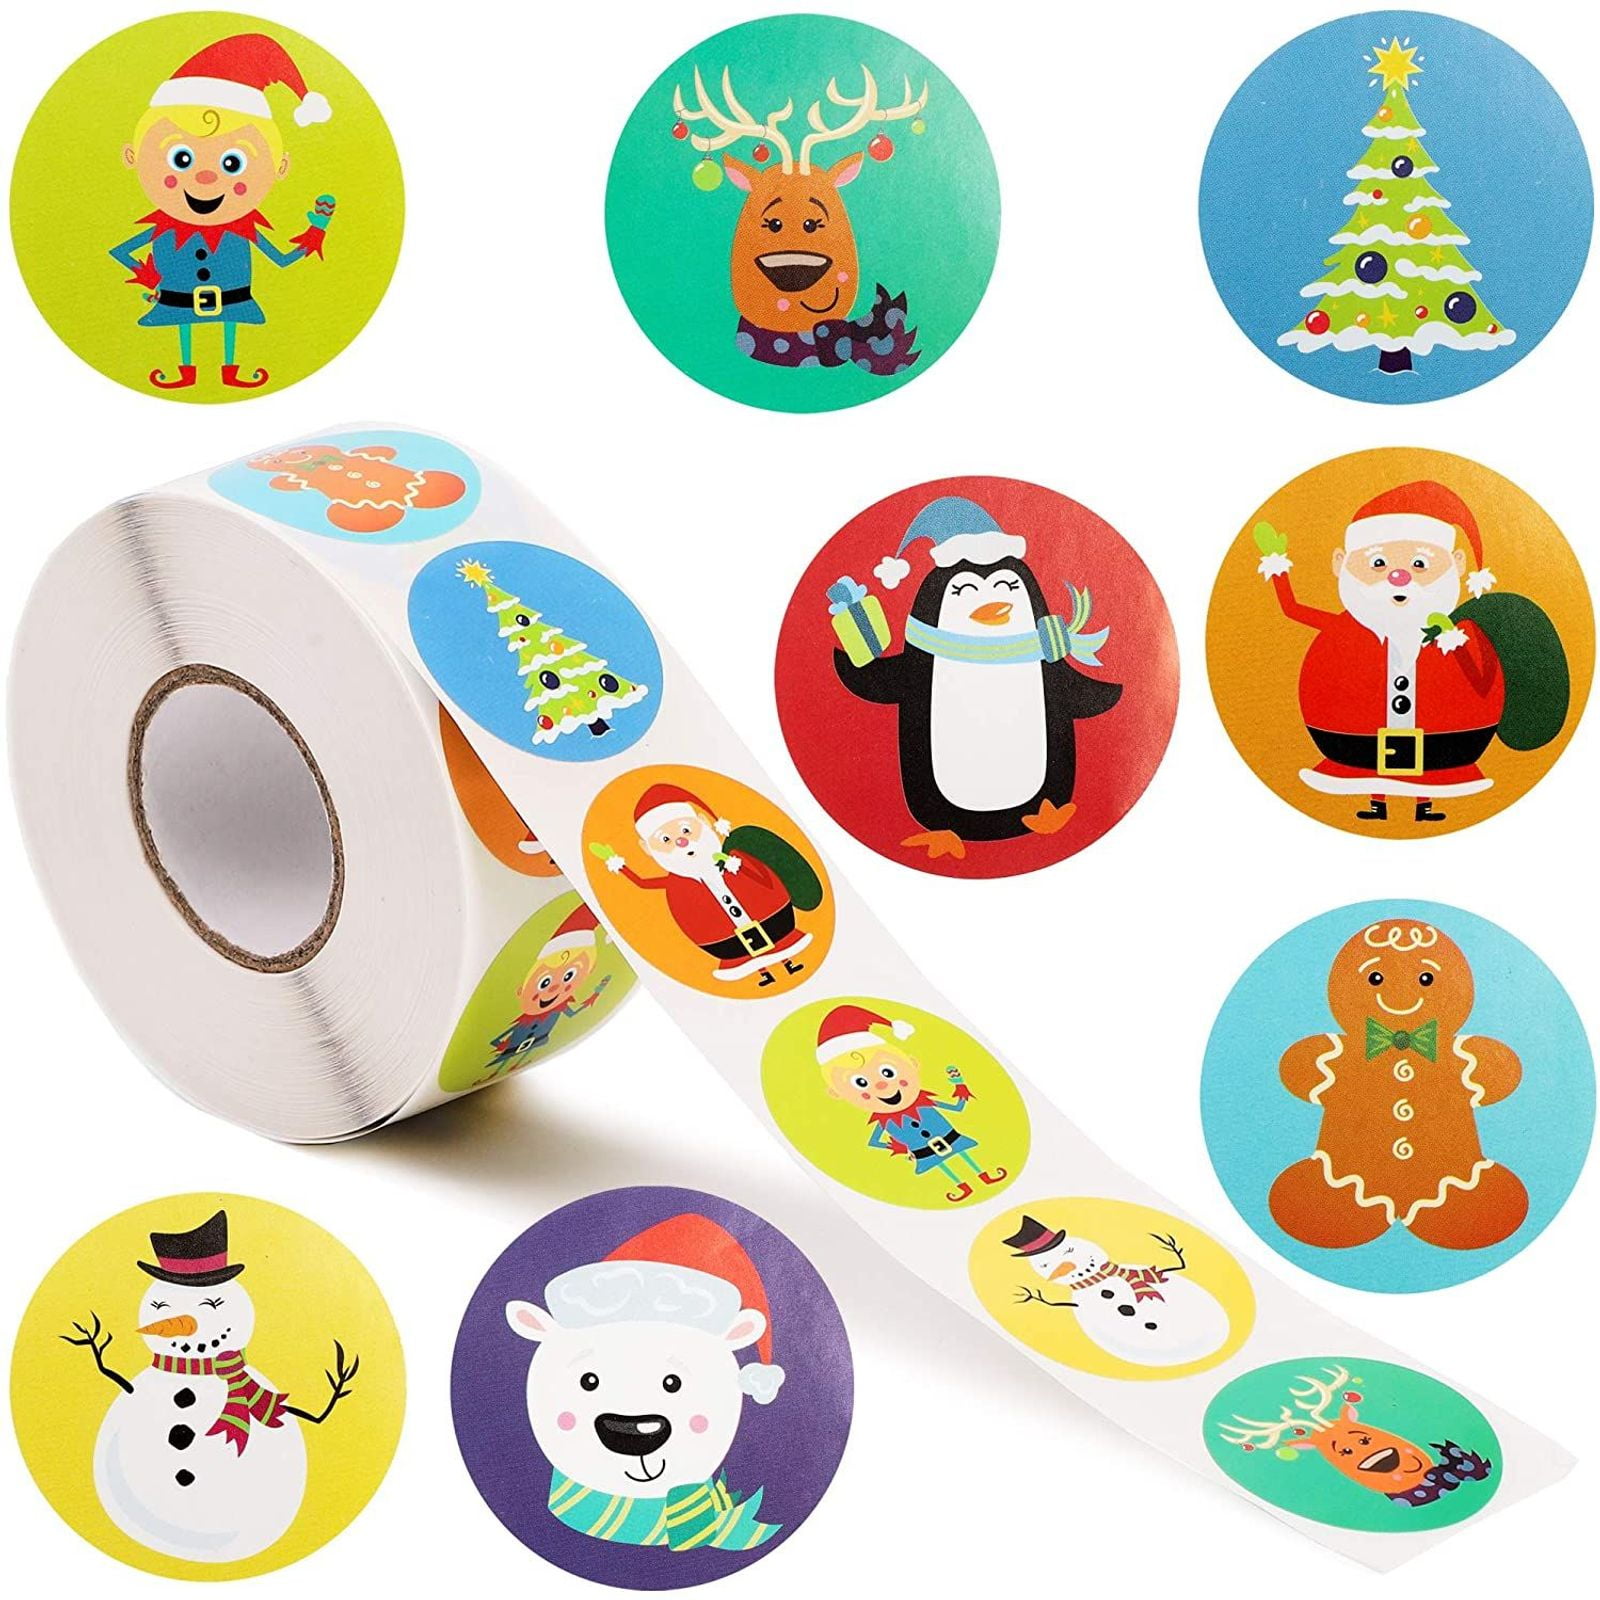 48 SNOOPY WINTER CHRISTMAS ENVELOPE SEALS LABELS STICKERS 1.2" ROUND 